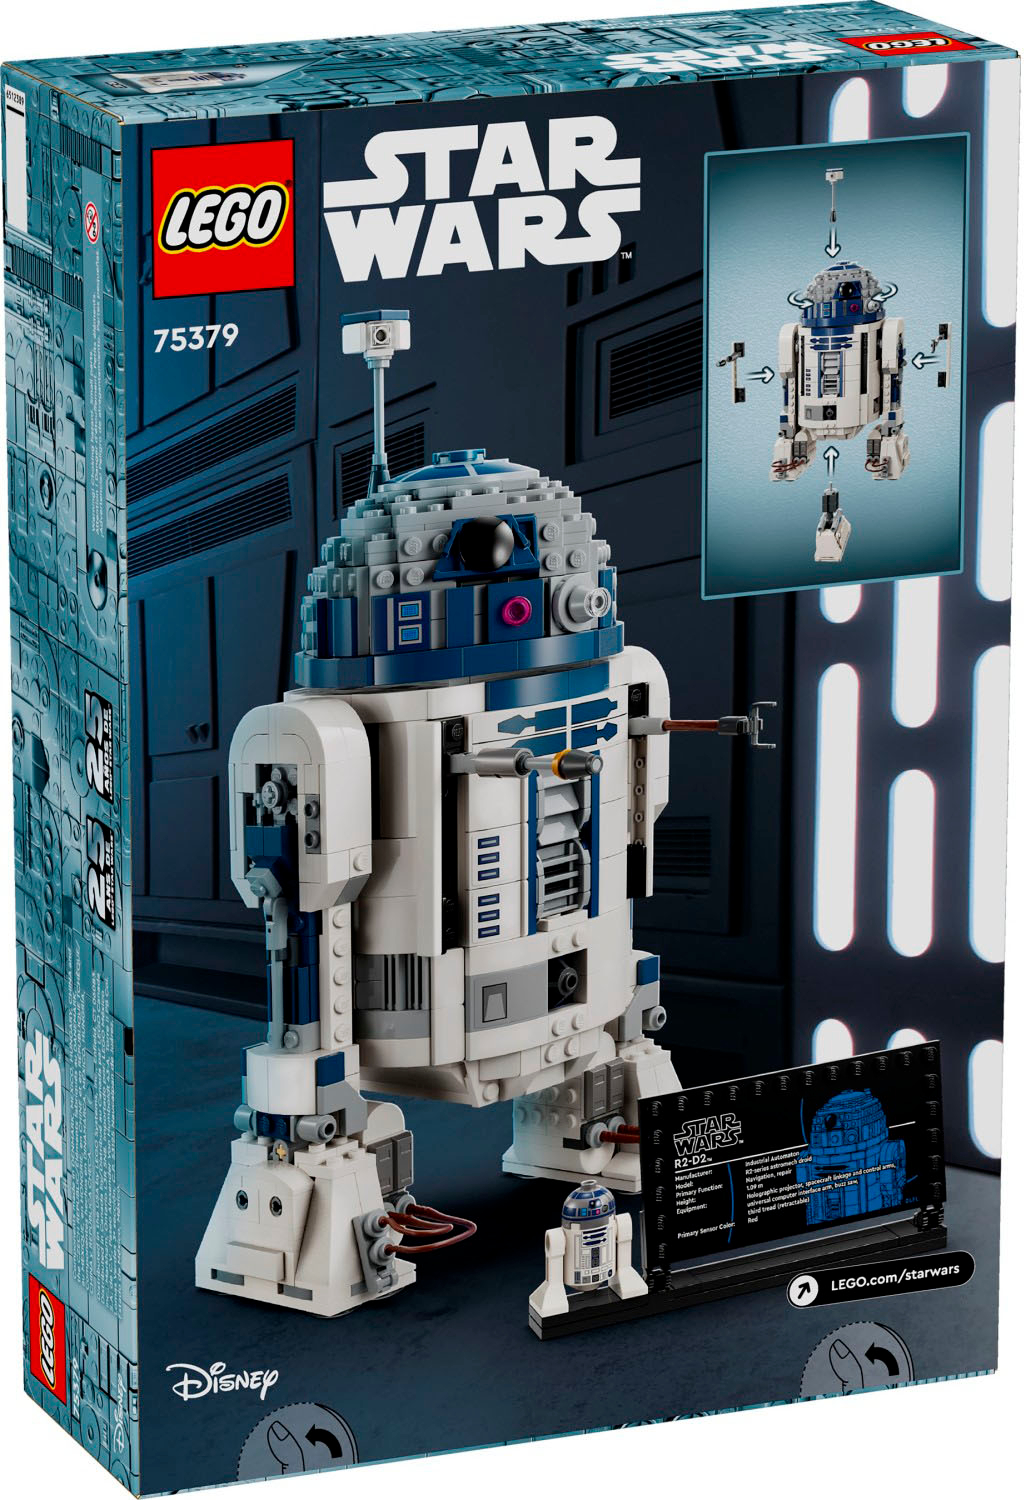 LEGO Star Wars R2-D2 Buildable Toy Droid for Display and Play